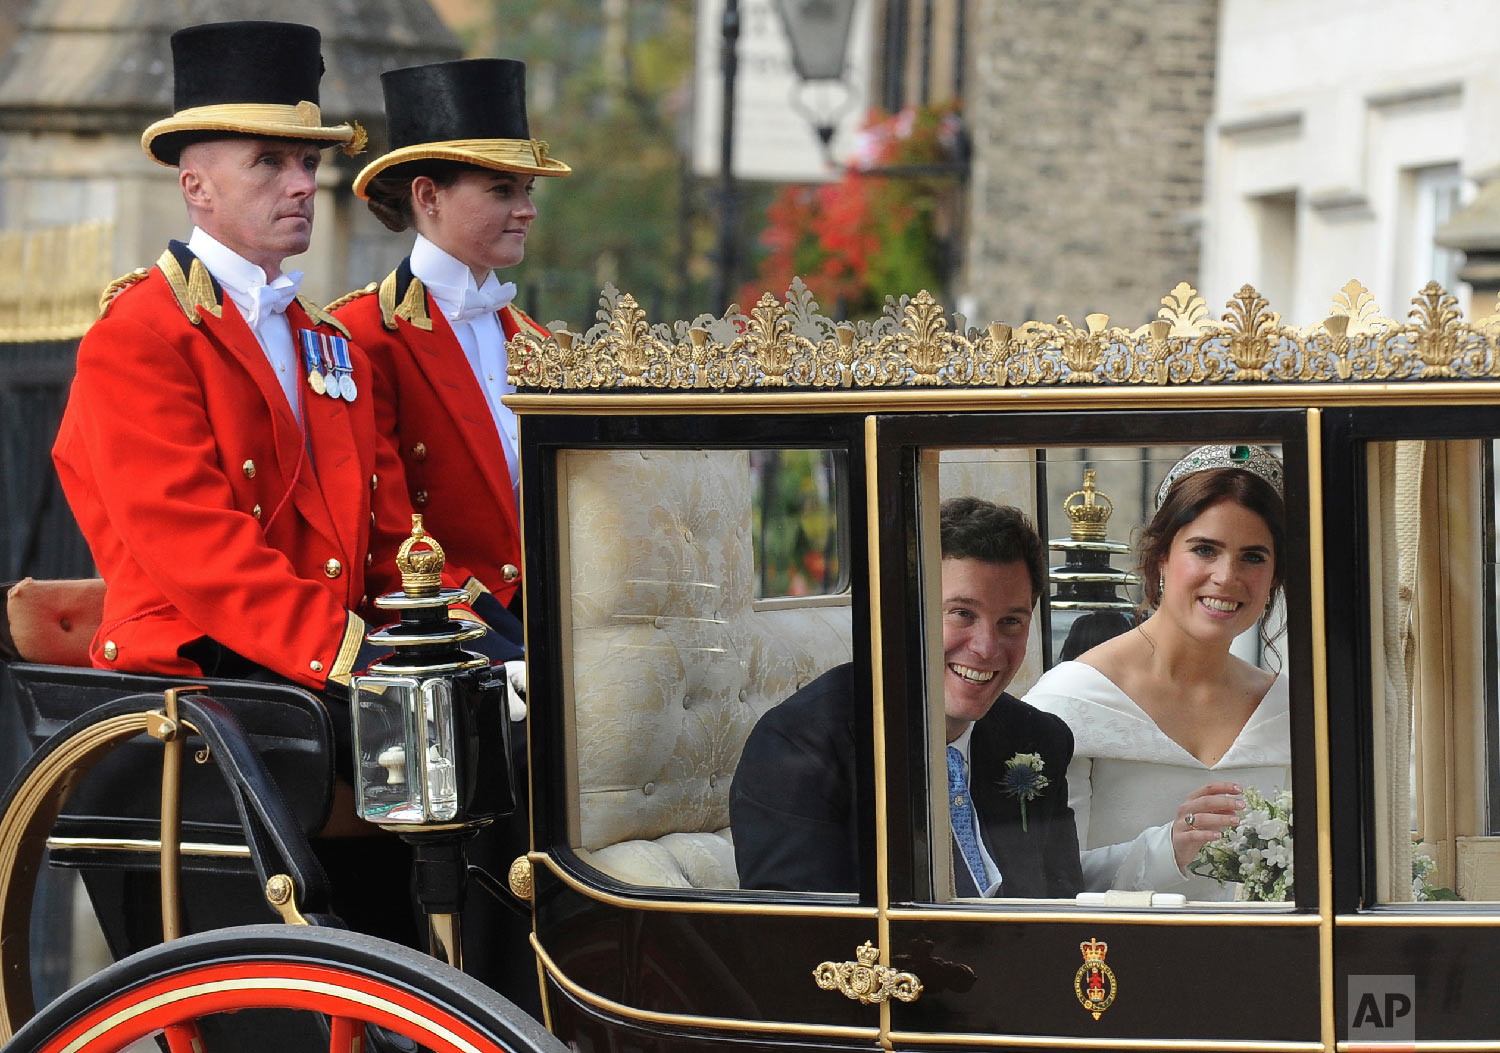  Princess Eugenie of York, right, and Jack Brooksbank look out from their carriage as they travel from St. George's Chapel to Windsor Castle after their wedding in Windsor, England, near London, on Oct. 12, 2018. (AP Photo/Rui Vieira) 